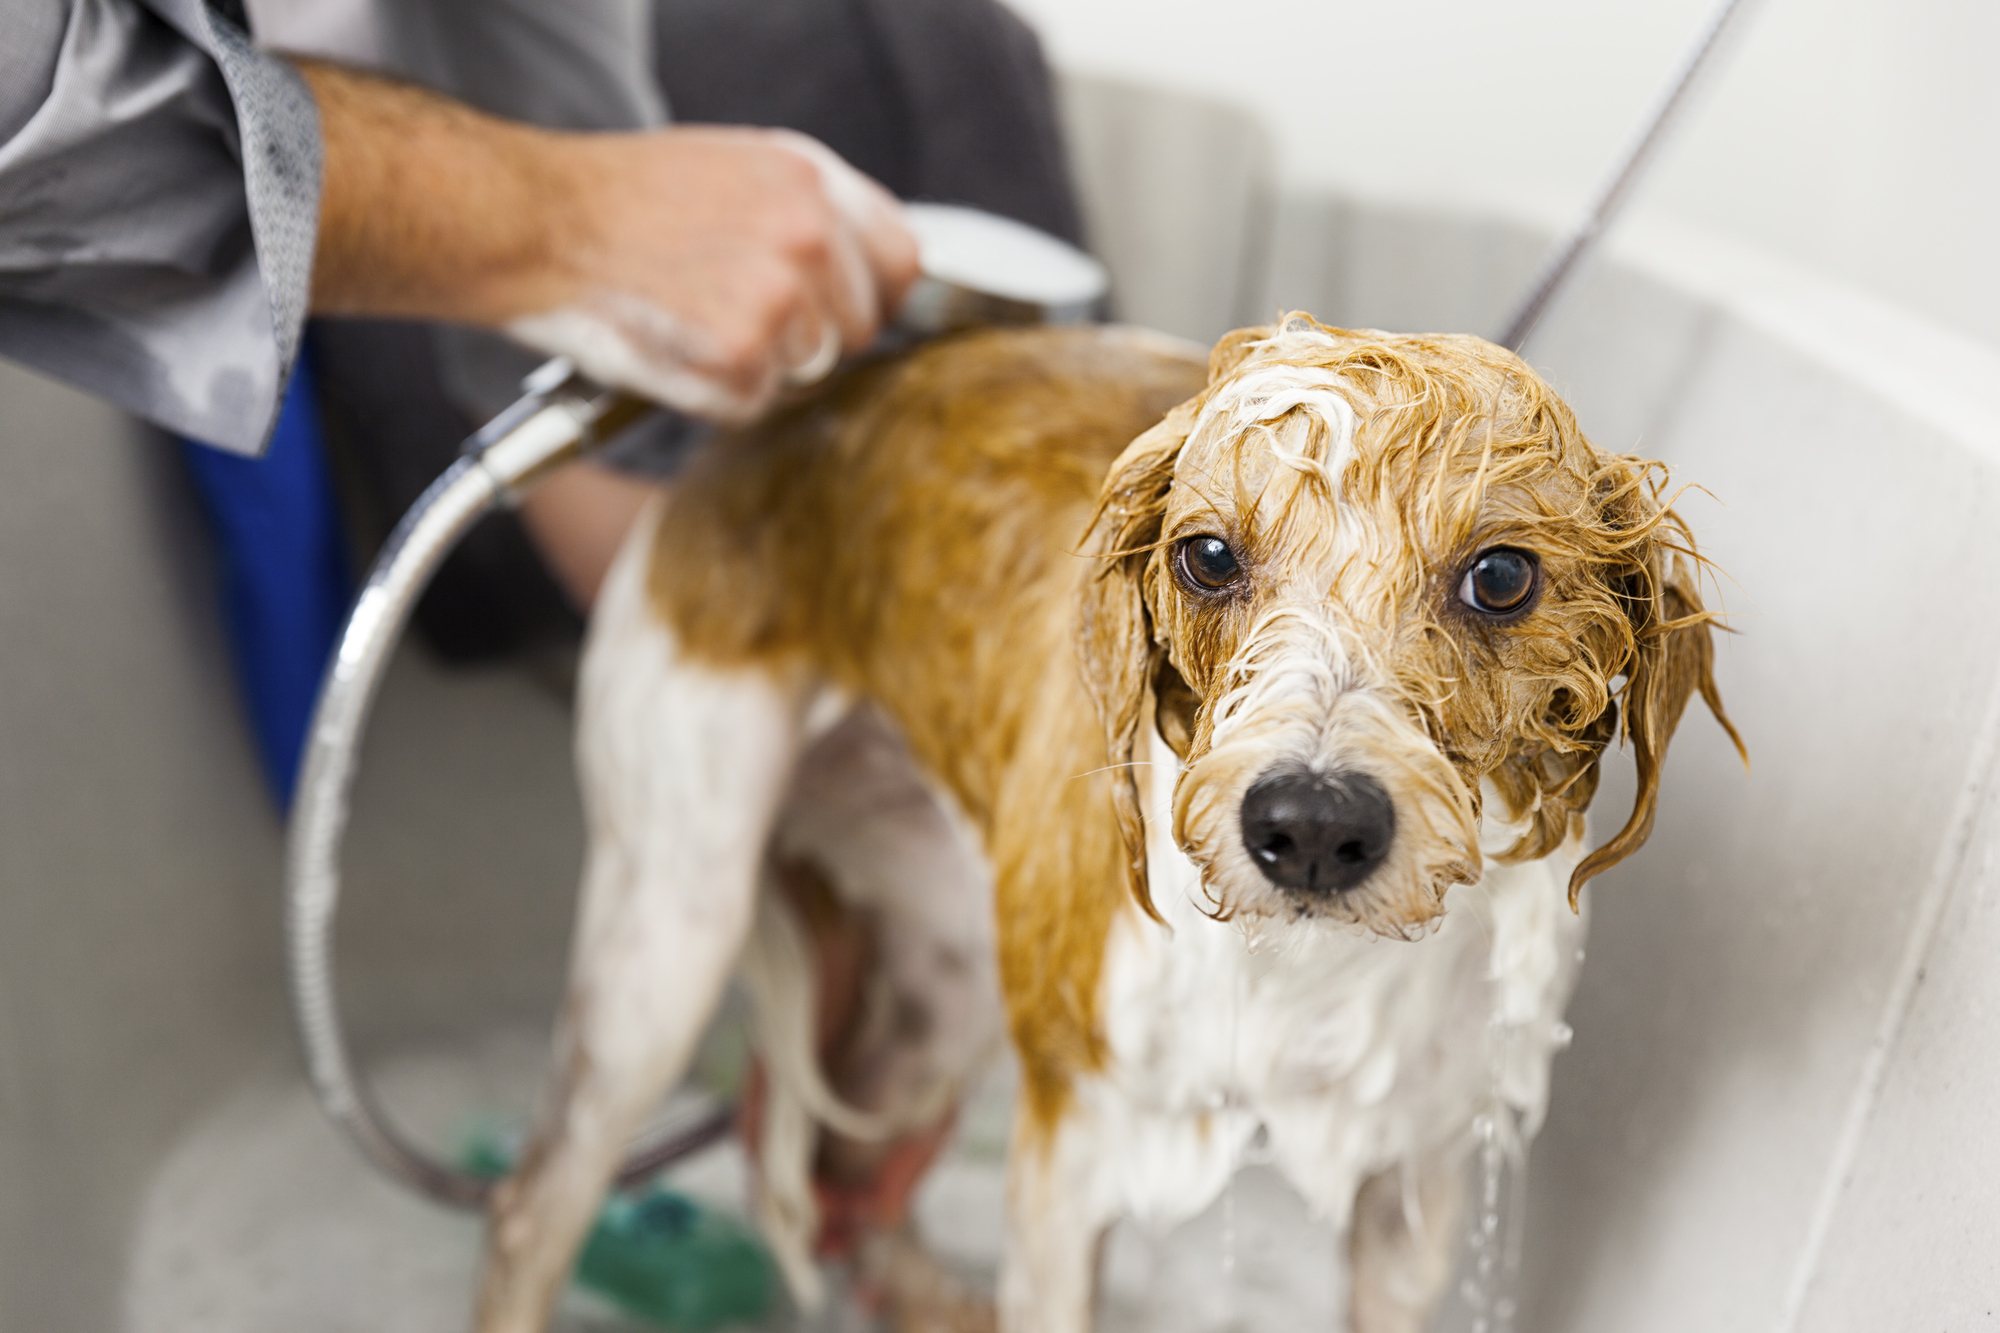 Can I use hair conditioner on my dog?